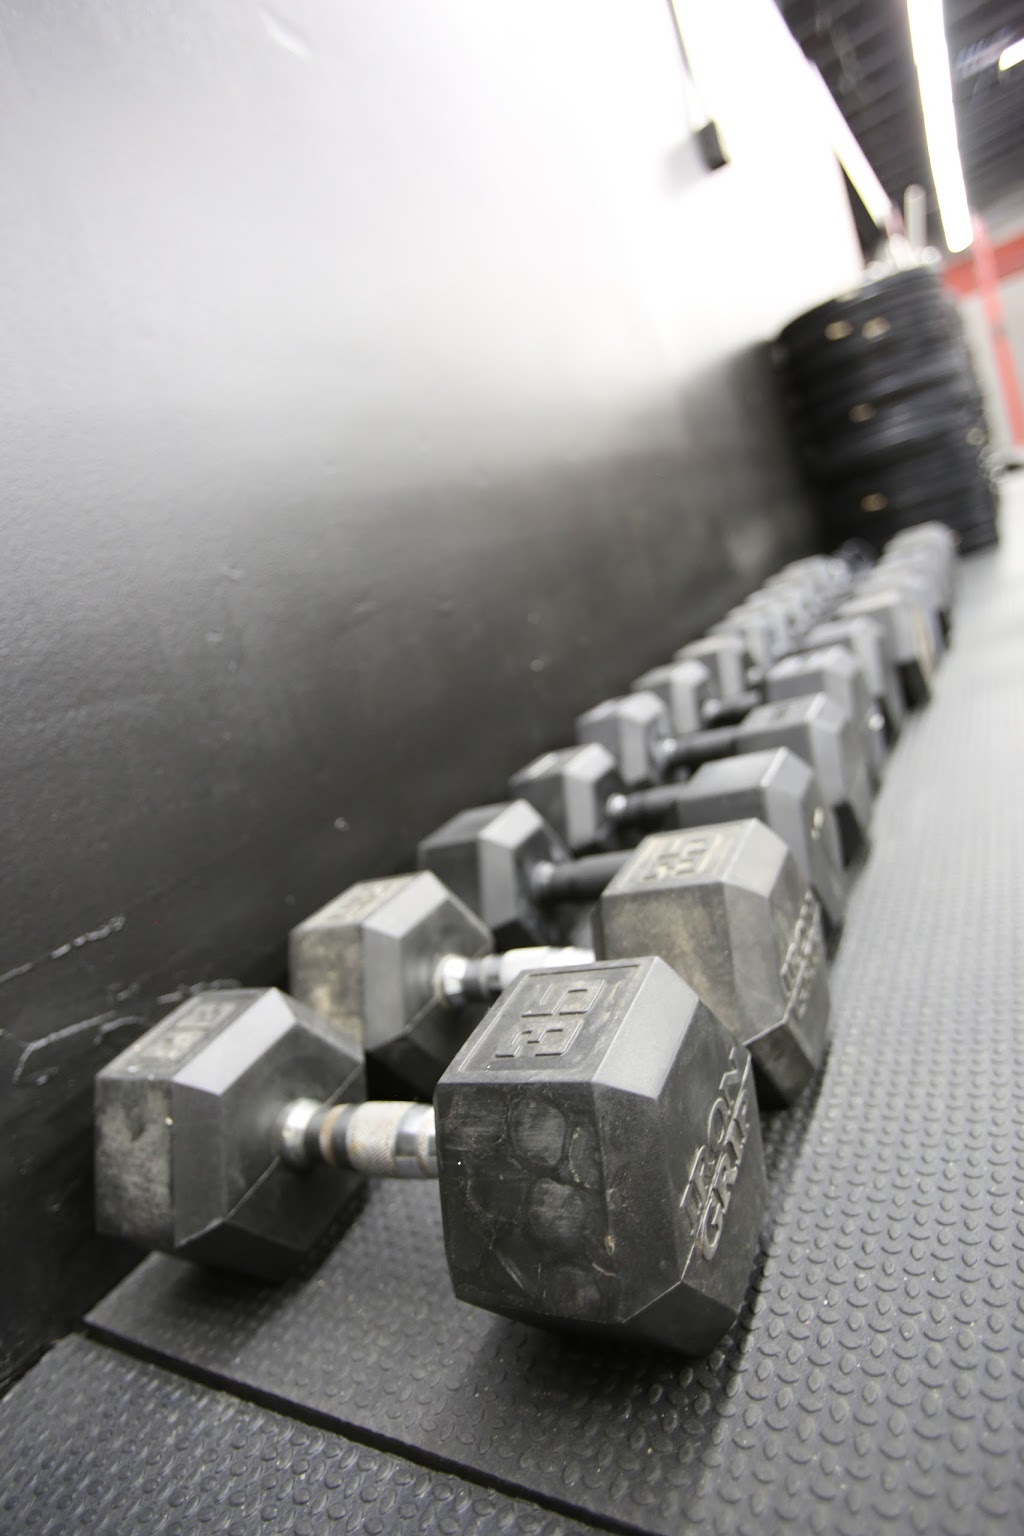 Cable CrossFit | 1320 N Benson Ave #D, Upland, CA 91786, USA | Phone: (909) 608-2345